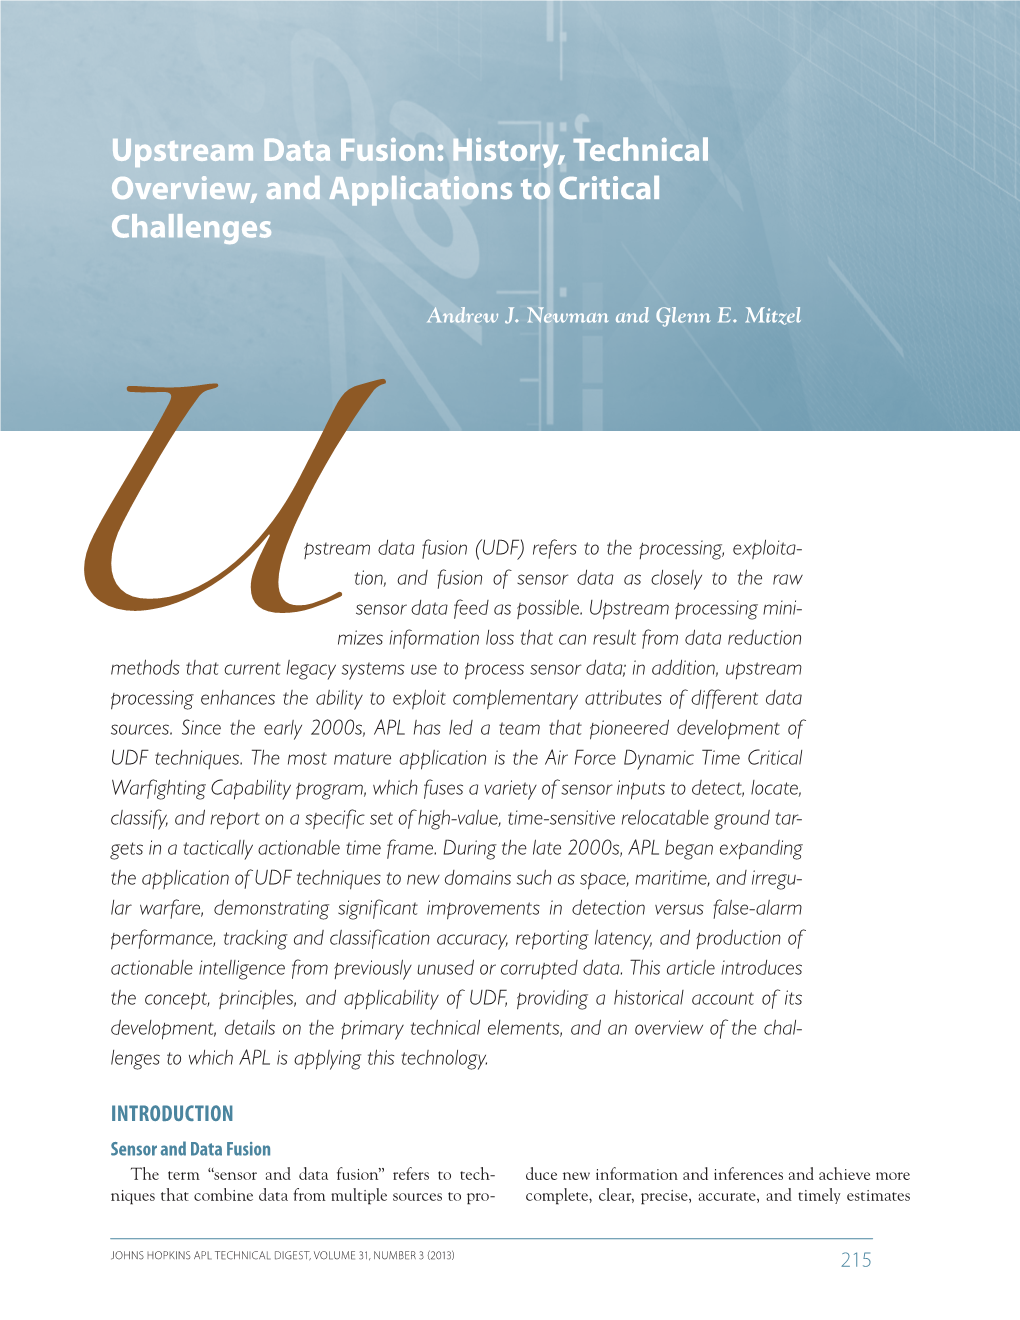 Upstream Data Fusion: History, Technical Overview, and Applications to Critical Challenges